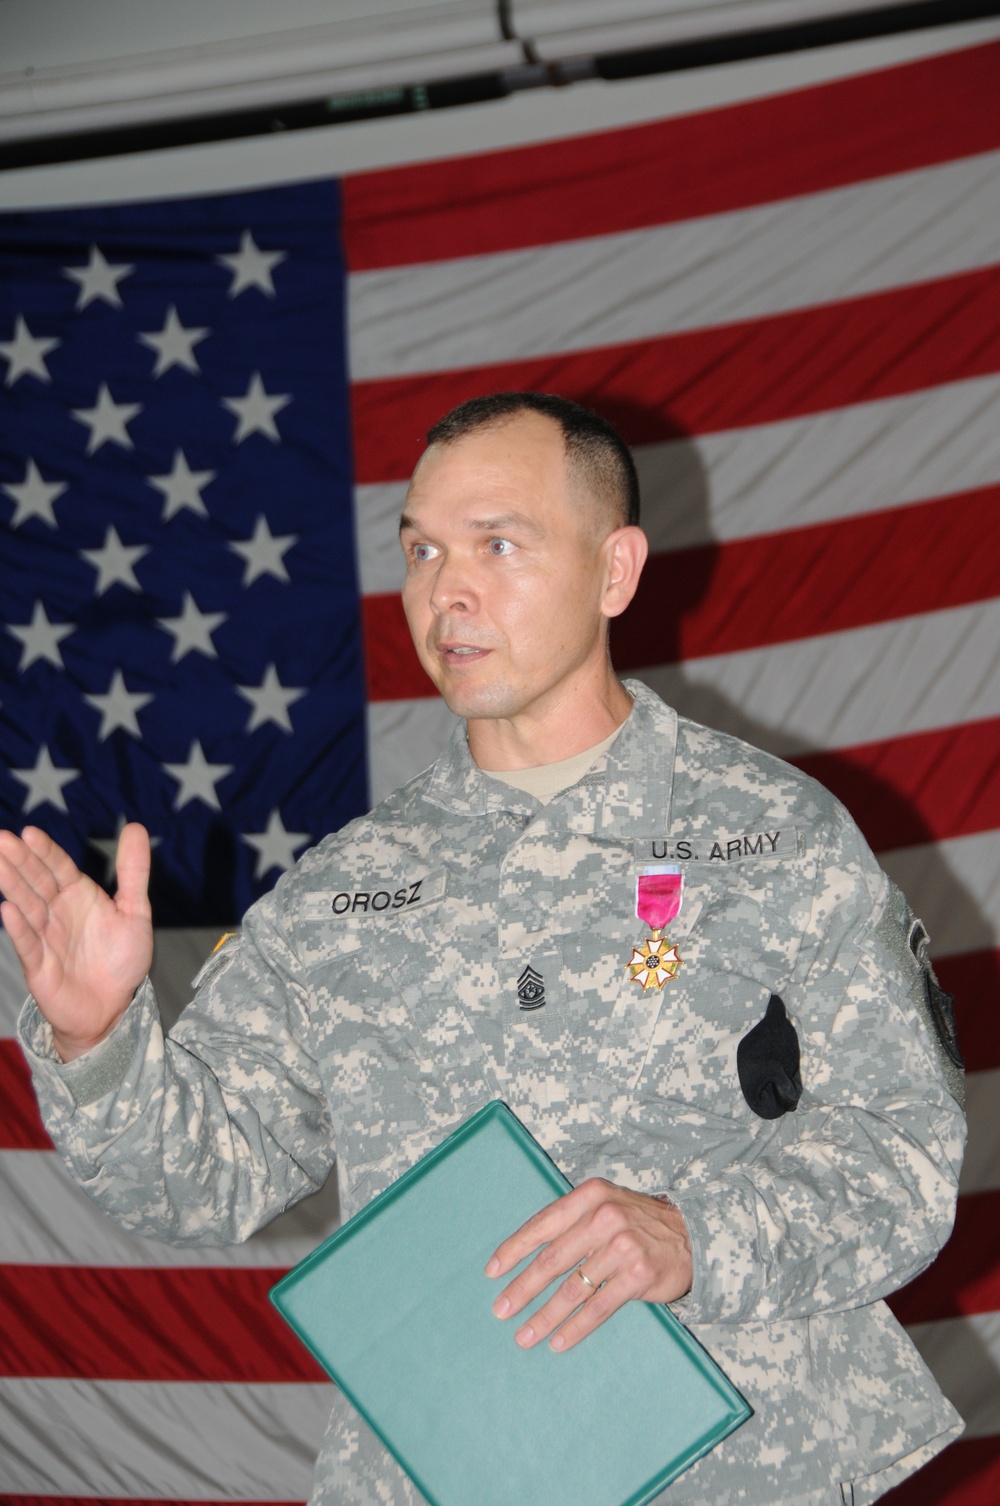 Command sergeant major says farewell to unit